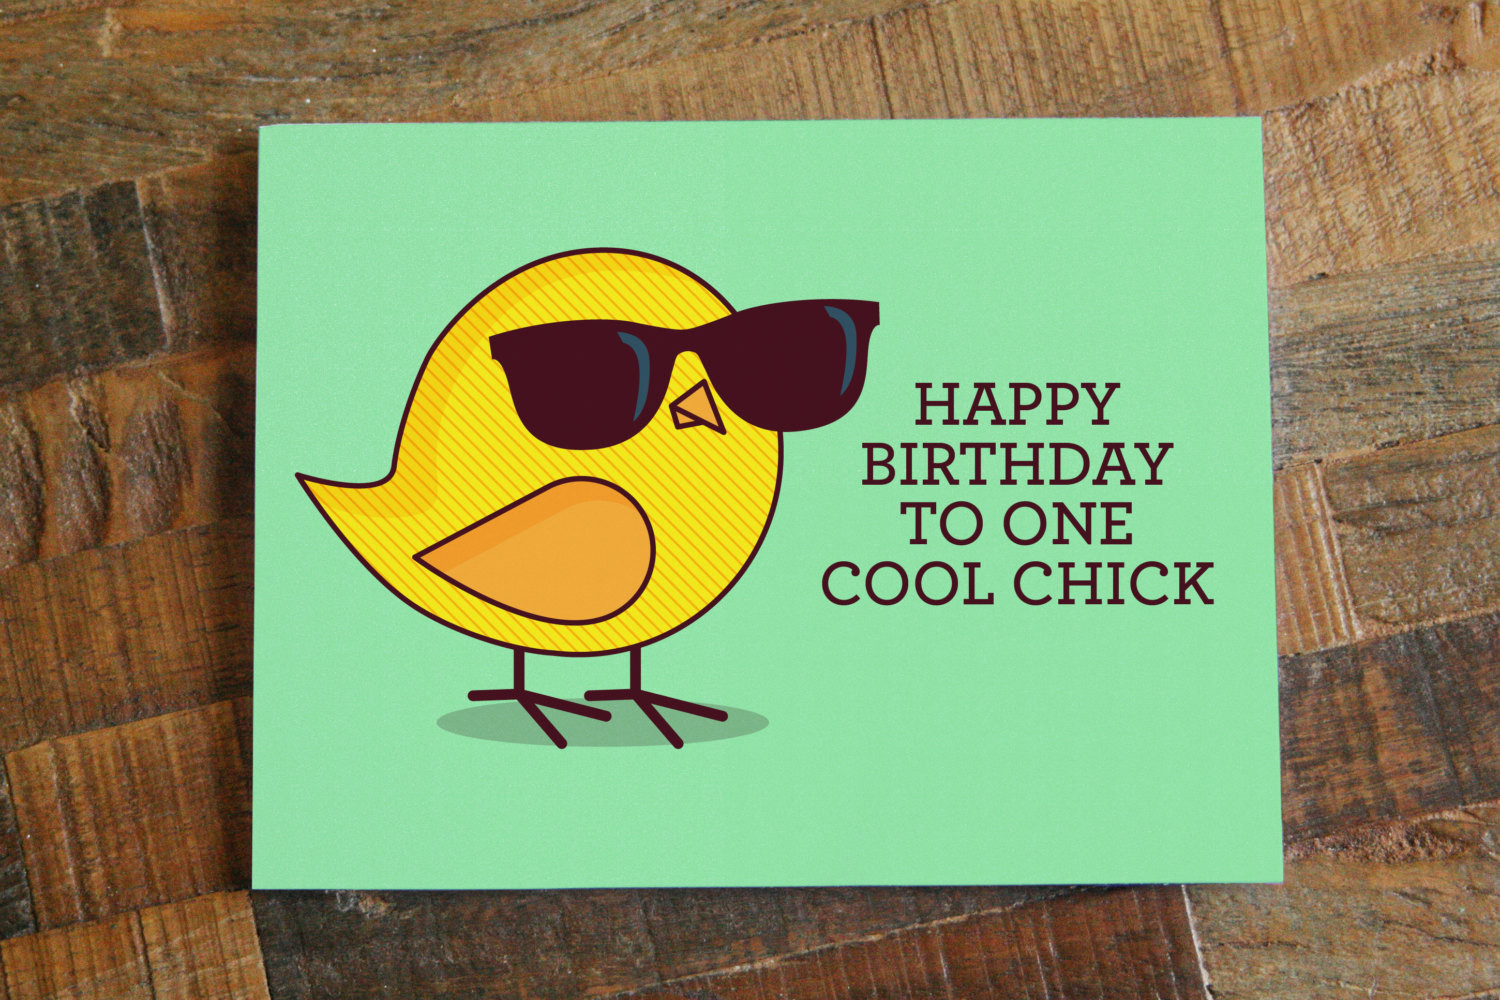 Birthday Cards Online Funny
 Funny Birthday Card For Her "Happy Birthday to e Cool